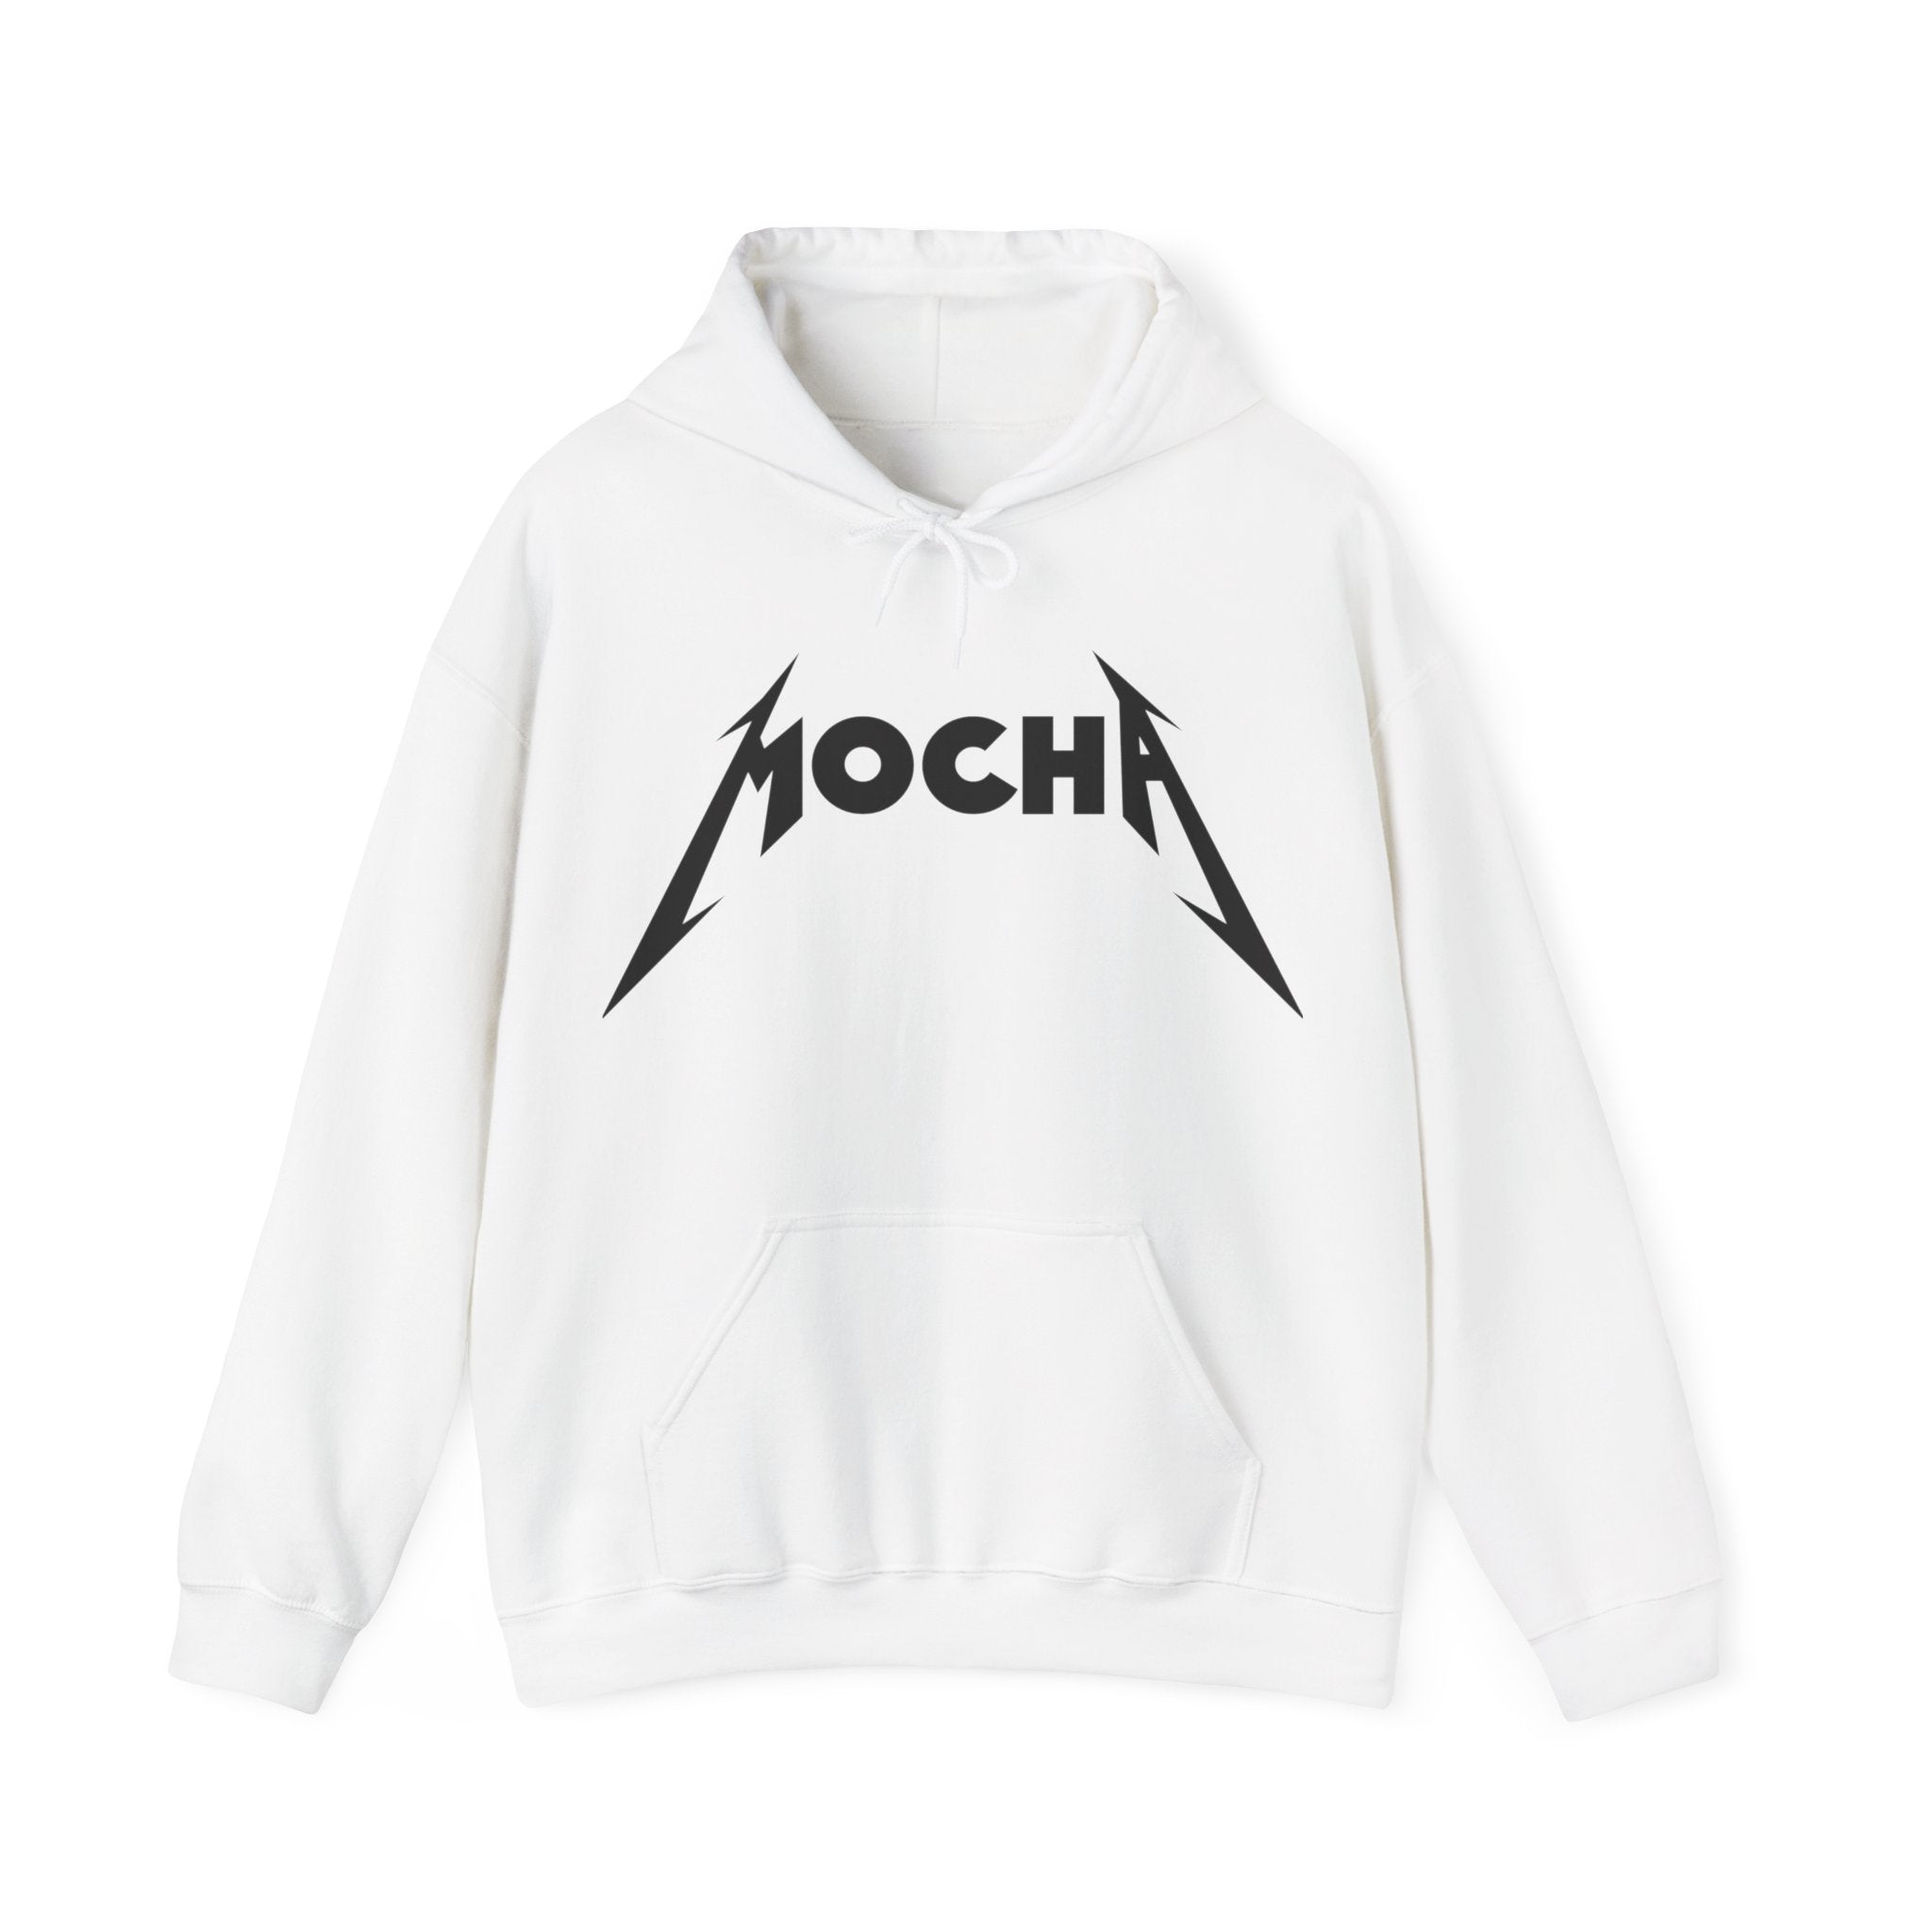 The Mocha - Hooded Sweatshirt offers style and comfort with its white hoodie featuring a hood and front pocket, printed with the text "MOCHA" in a unique and tasteful black font resembling the Metallica logo.